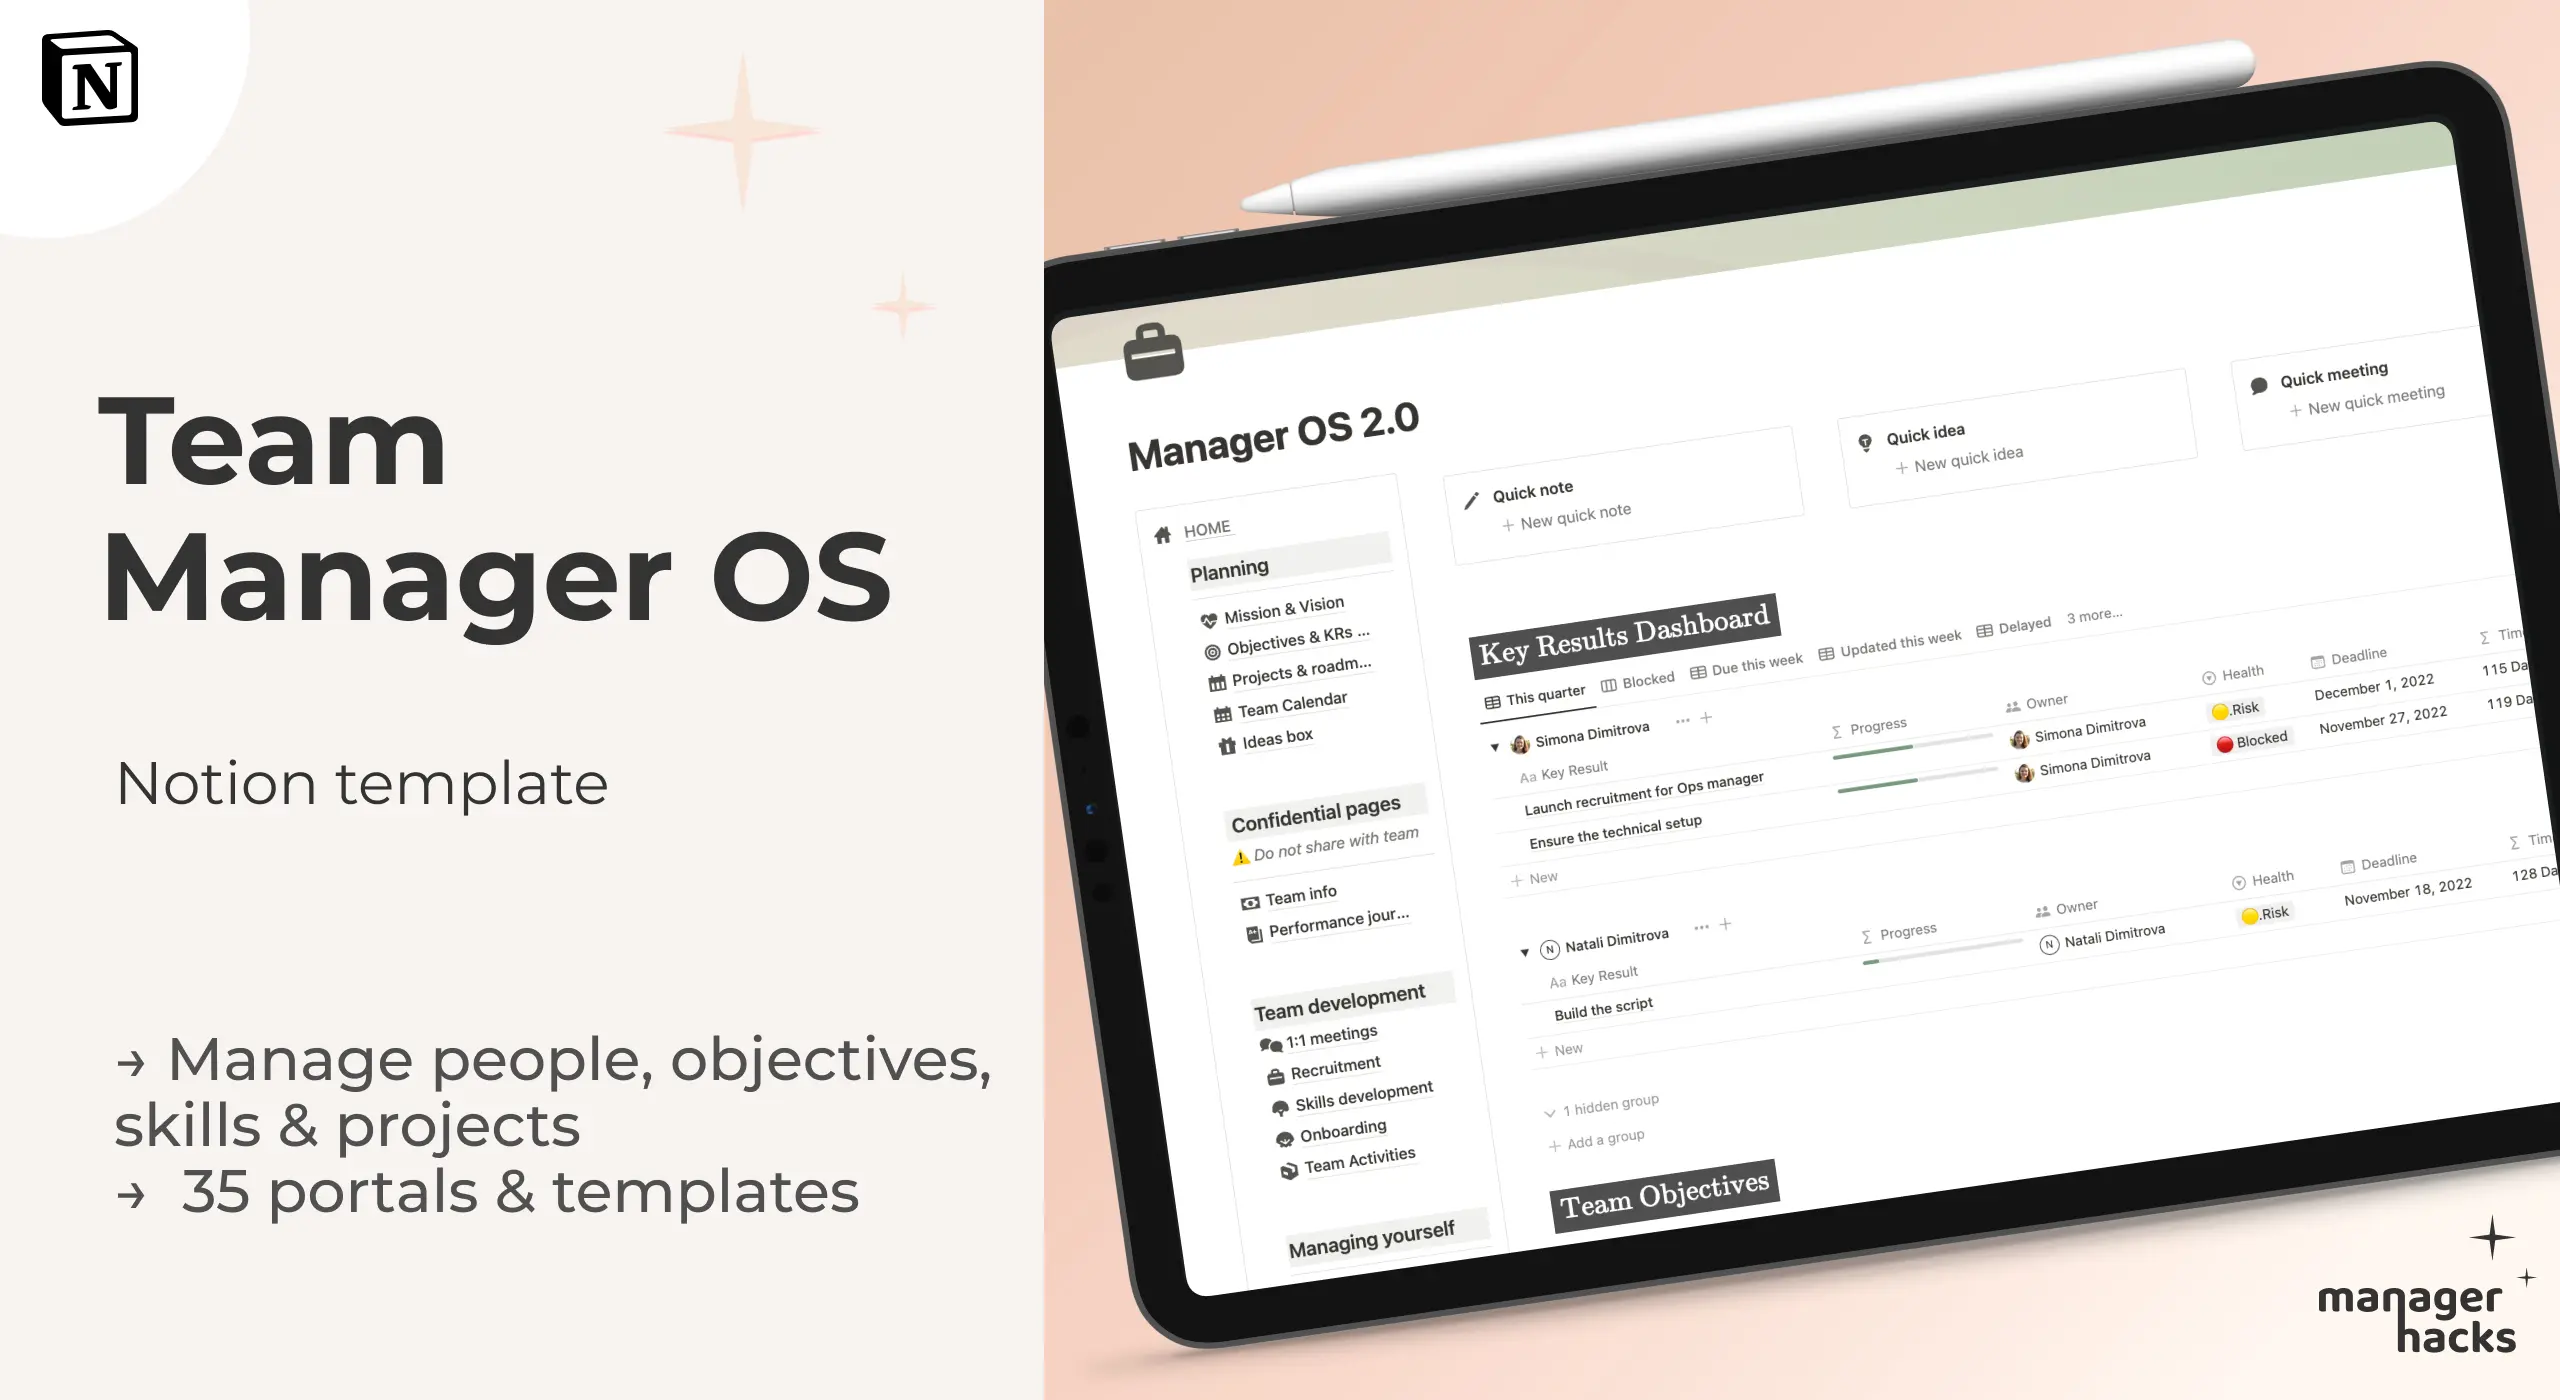 Team Manager Os - Complete Notion Portal For People Managers image